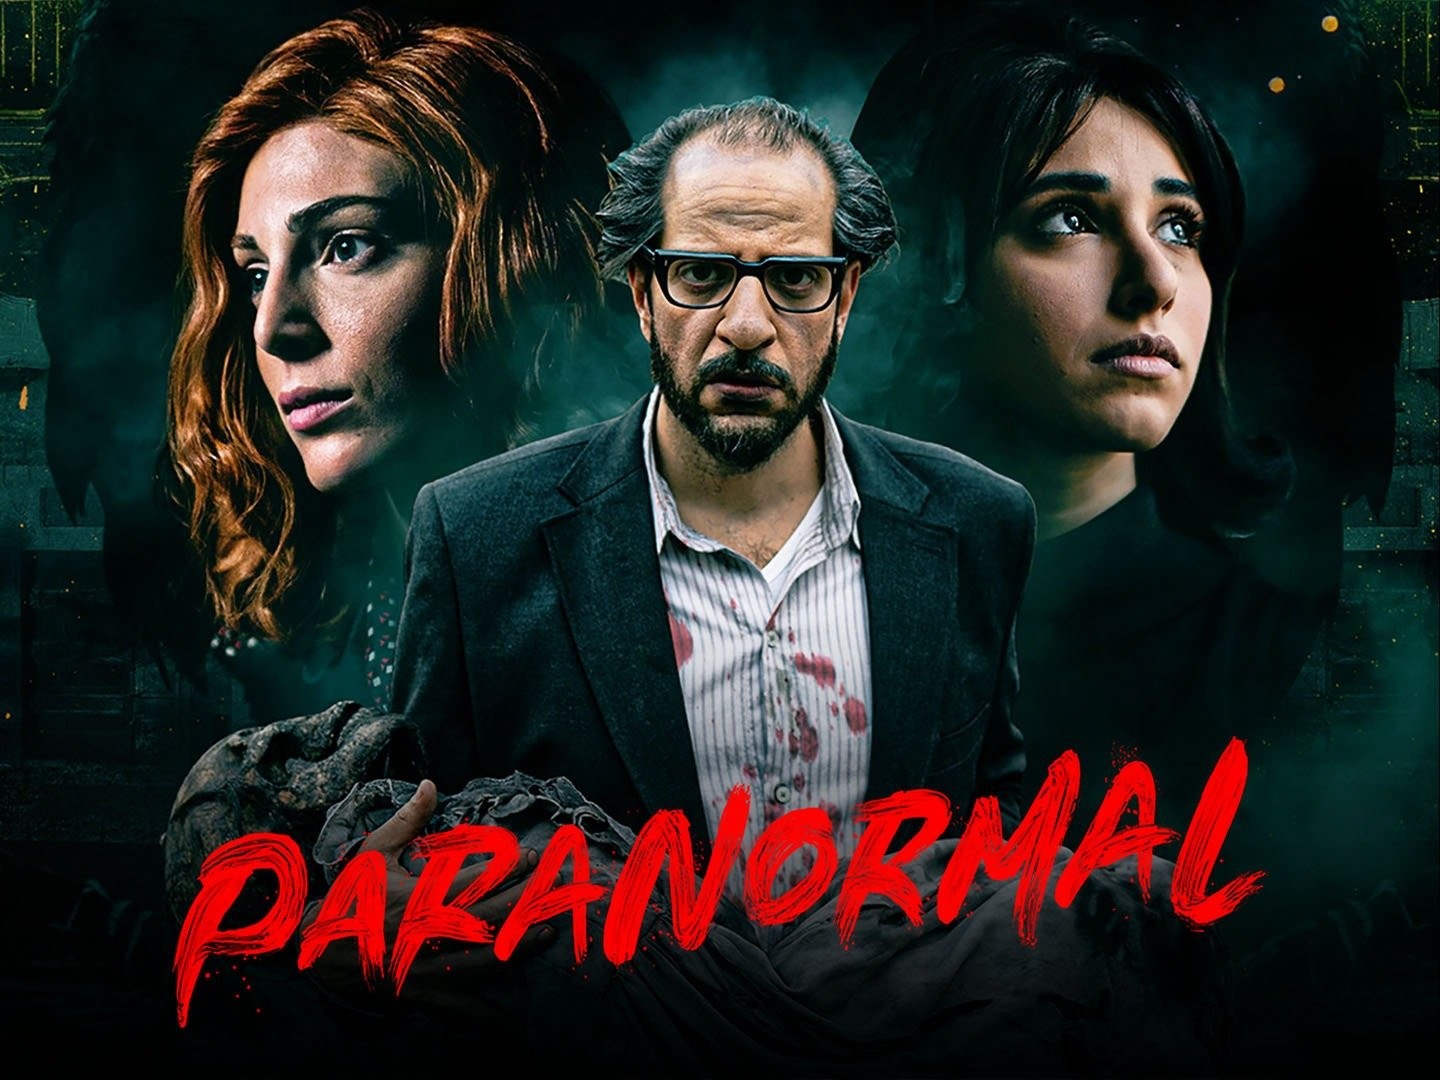 TV Time - Paranormal Order (TVShow Time)